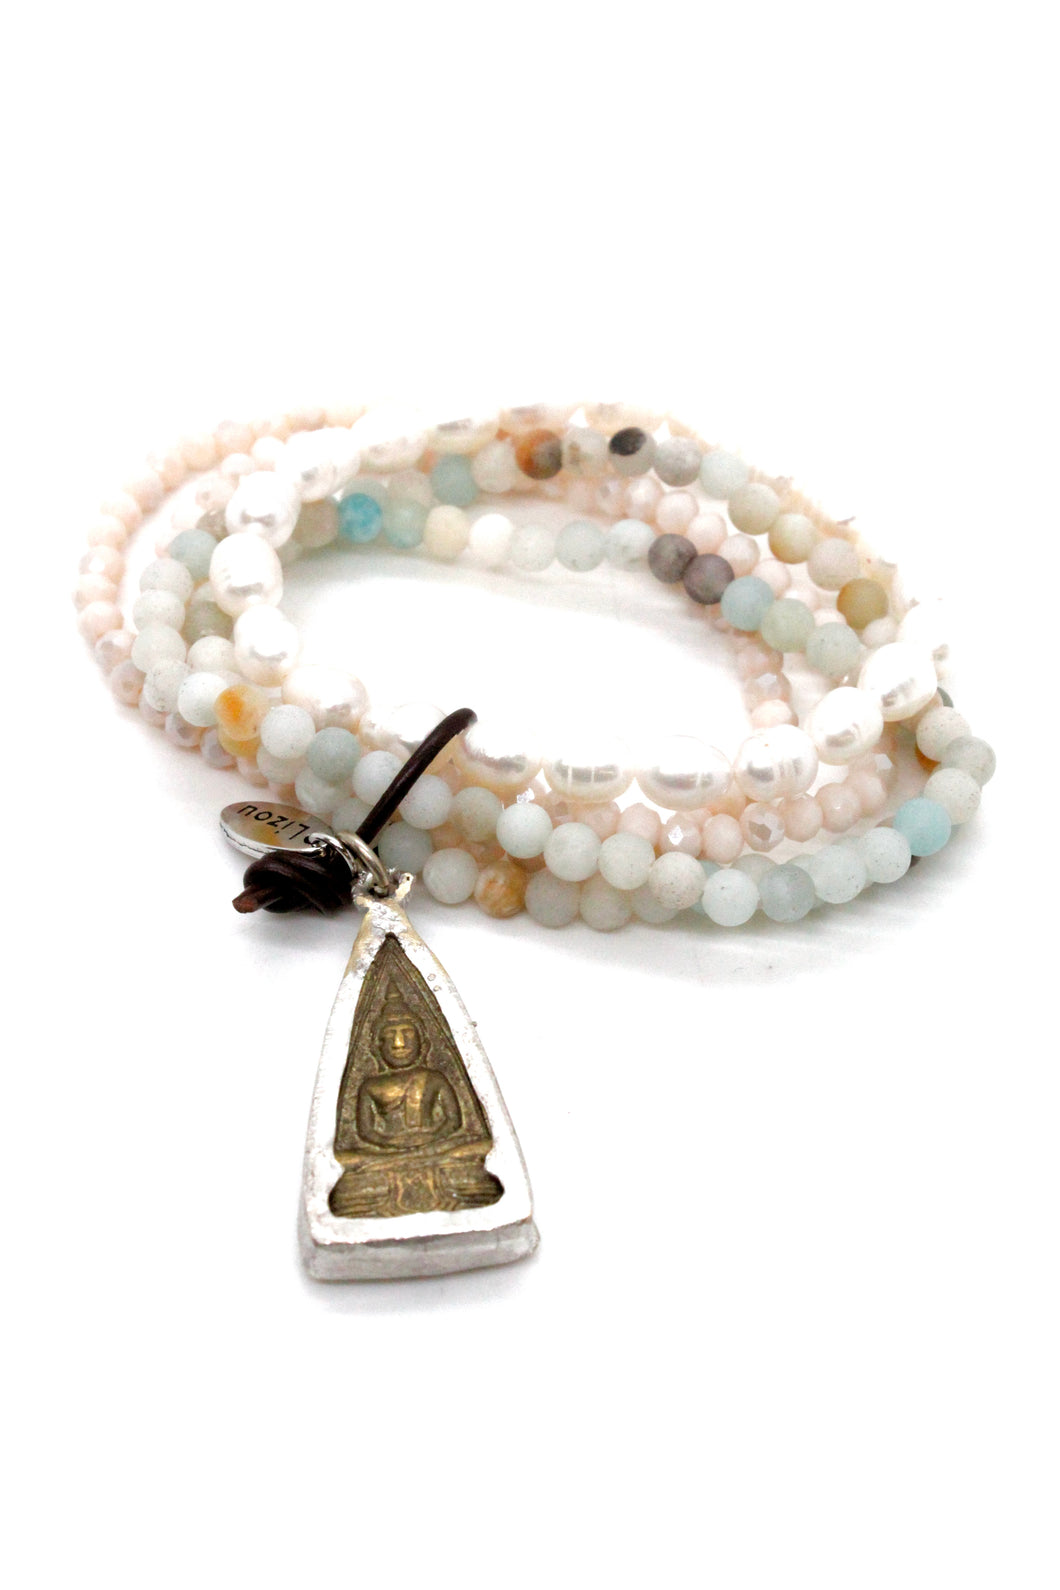 Amazonite and Pearl Mix Bracelet with Two Tone Buddha Charm BL-Surf-B -The Buddha Collection-